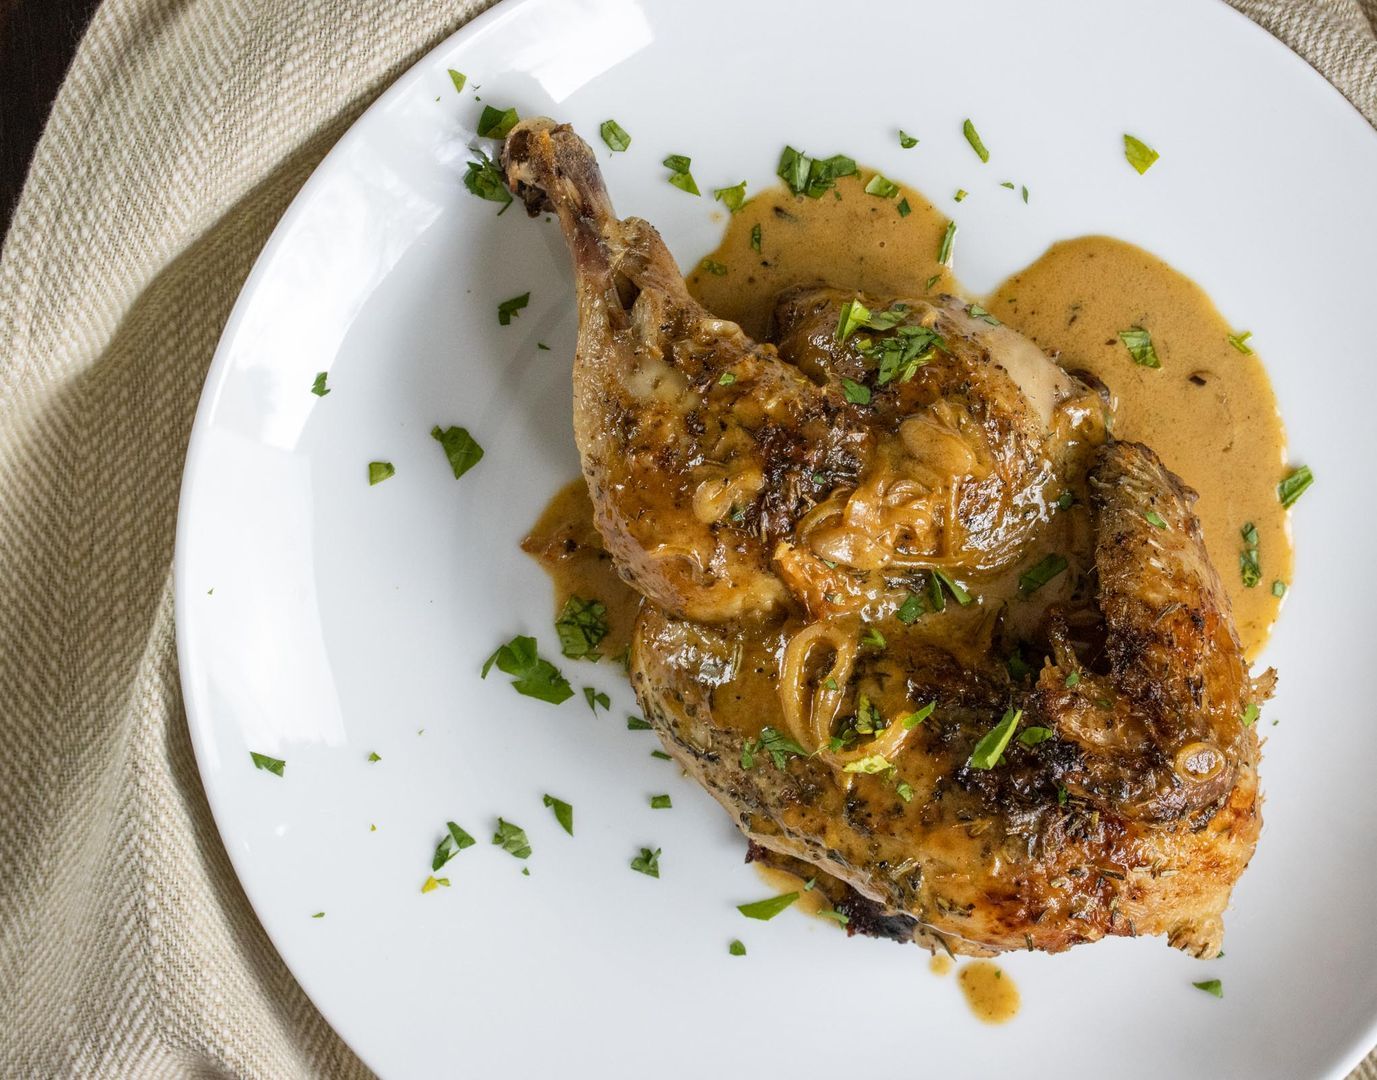 A delightful cornish hen roasted and served with a savory whiskey, shallots cream sauce. A true delight for your senses.
Love with each bite.
RECIPE on the comments as well as on profile bio.
Enjoy!
.
.
.
.
.

#tastethisnext #igfoodies #foodgrams #foodstragram #yummyfoods #foodgrammer #foodstyleguide #instayummy #instaeating #foodgramers #foodgrammers #foodstyles #foodstyler #instafoodiee #eattheworldtour #giangiskitchen #feedyoursoul #todayfood #feedfeed #huffposttaste #foodgawker #foodblogfeed  #instafoodie #ilovefood #dinnerrecipe #buzzfeast #foodstyling #azfoodporn #azblooger #azfoodblogger